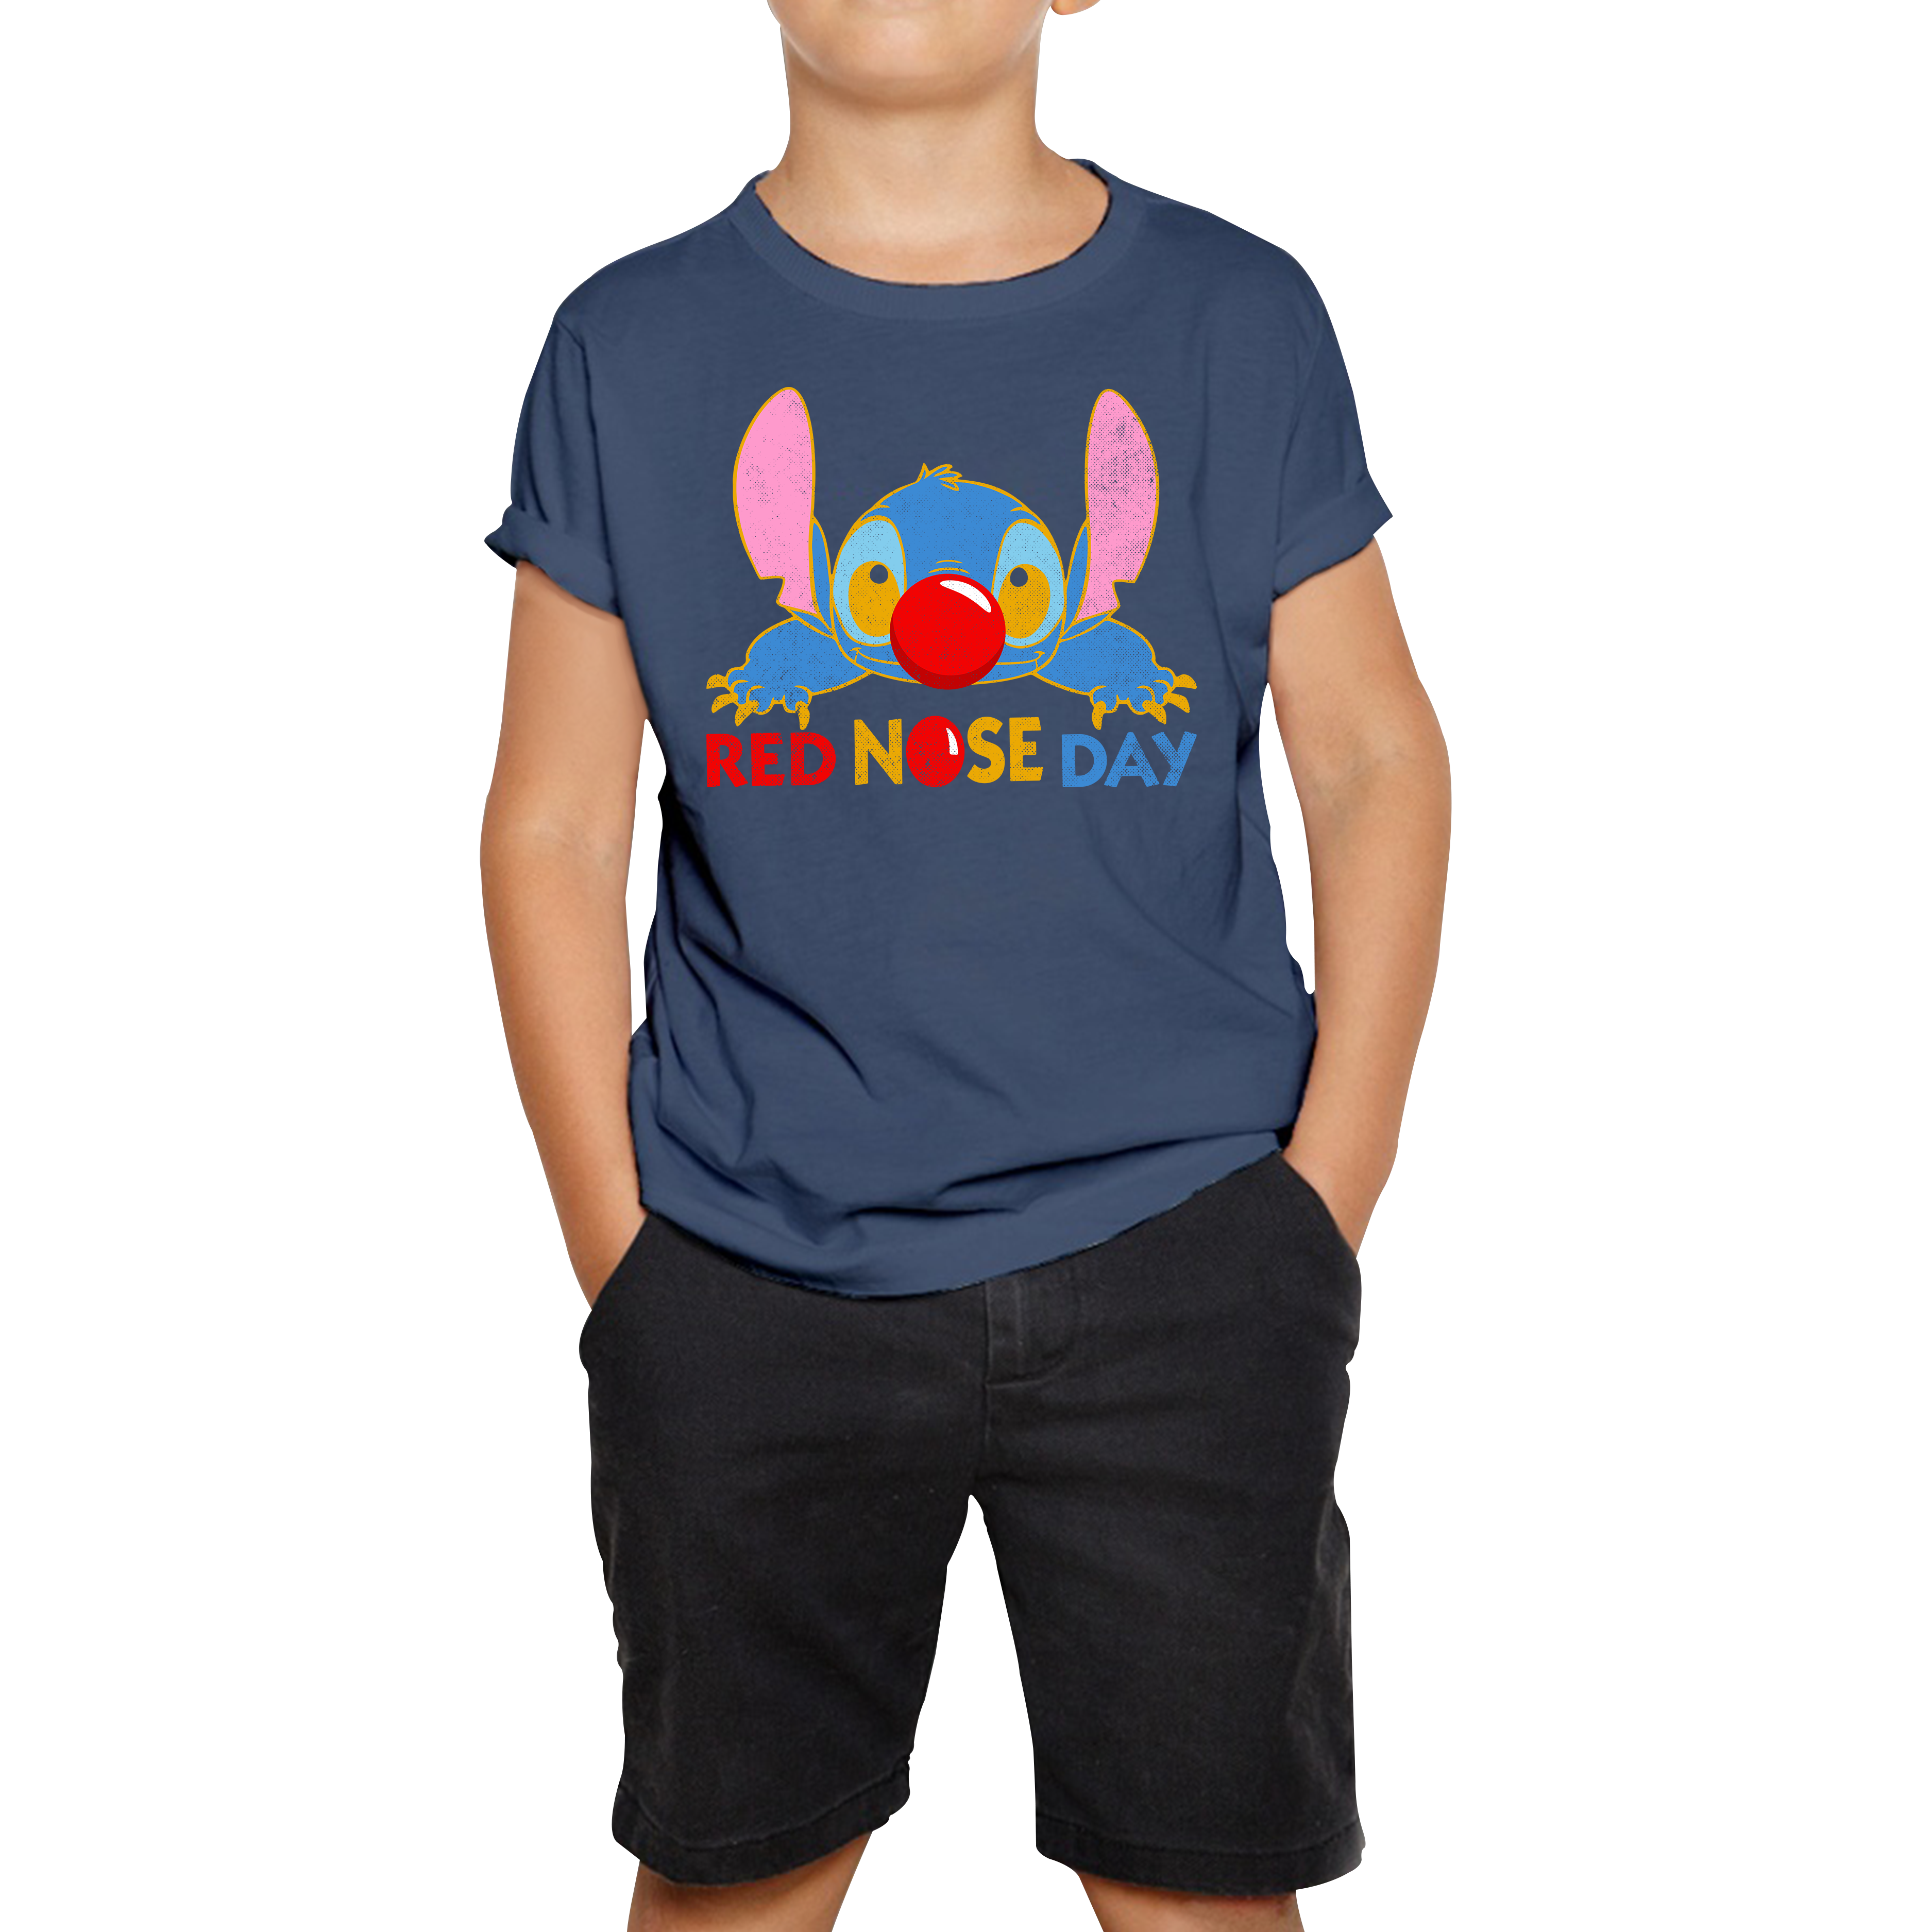 Disney Stitch Red Nose Day Kids Tee Top Ohana Red Nose Day Funny  Kids T Shirt. 50% Goes To Charity